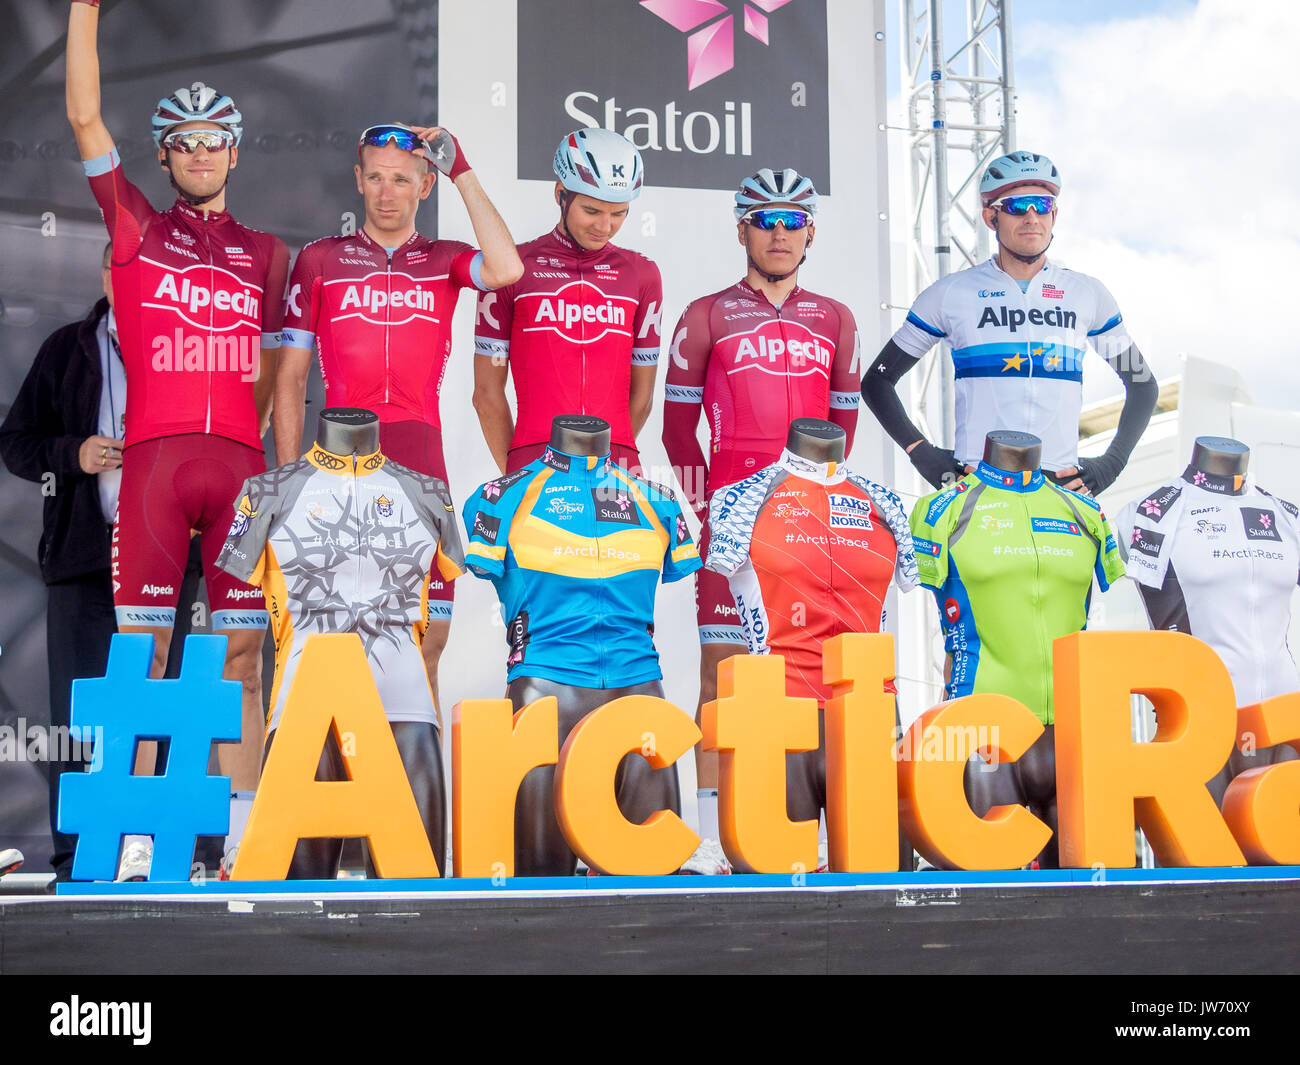 Photo from the annual Arctic Race of Noway. A Cycling competition over 4 days in the northern part of Norway. Cyclists from all over the world in pro, continental and amateur teams compete every year. Stock Photo